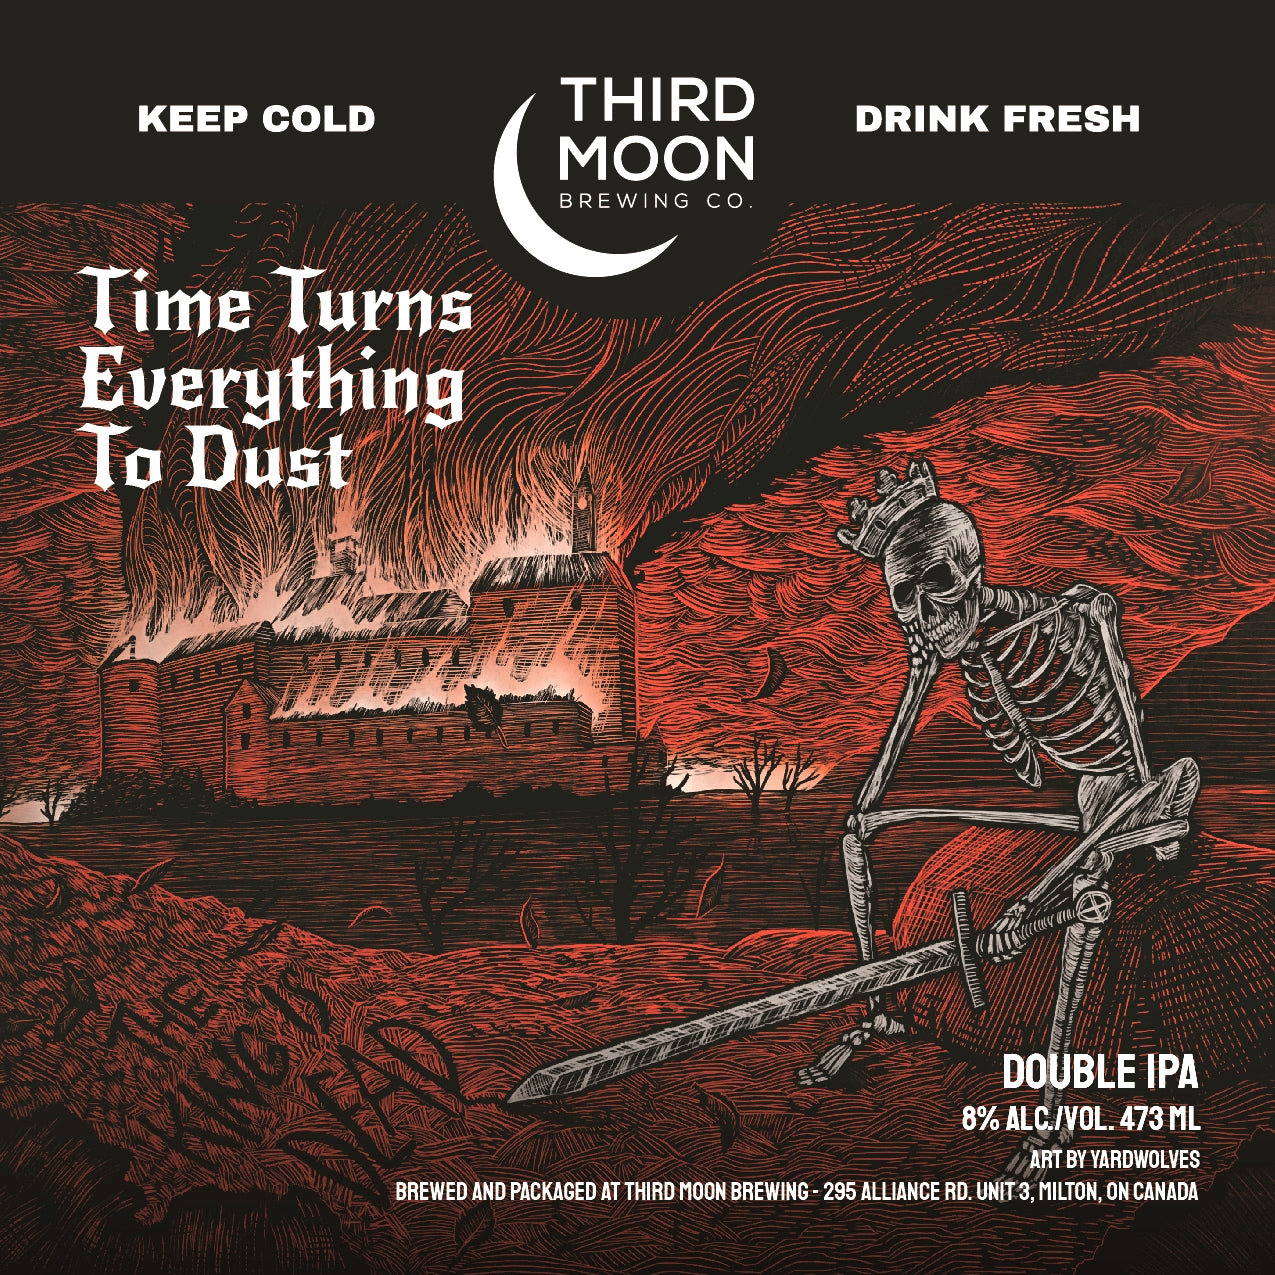 Double IPA - 4-pk of "Time Turns Everything To Dust" tall cans